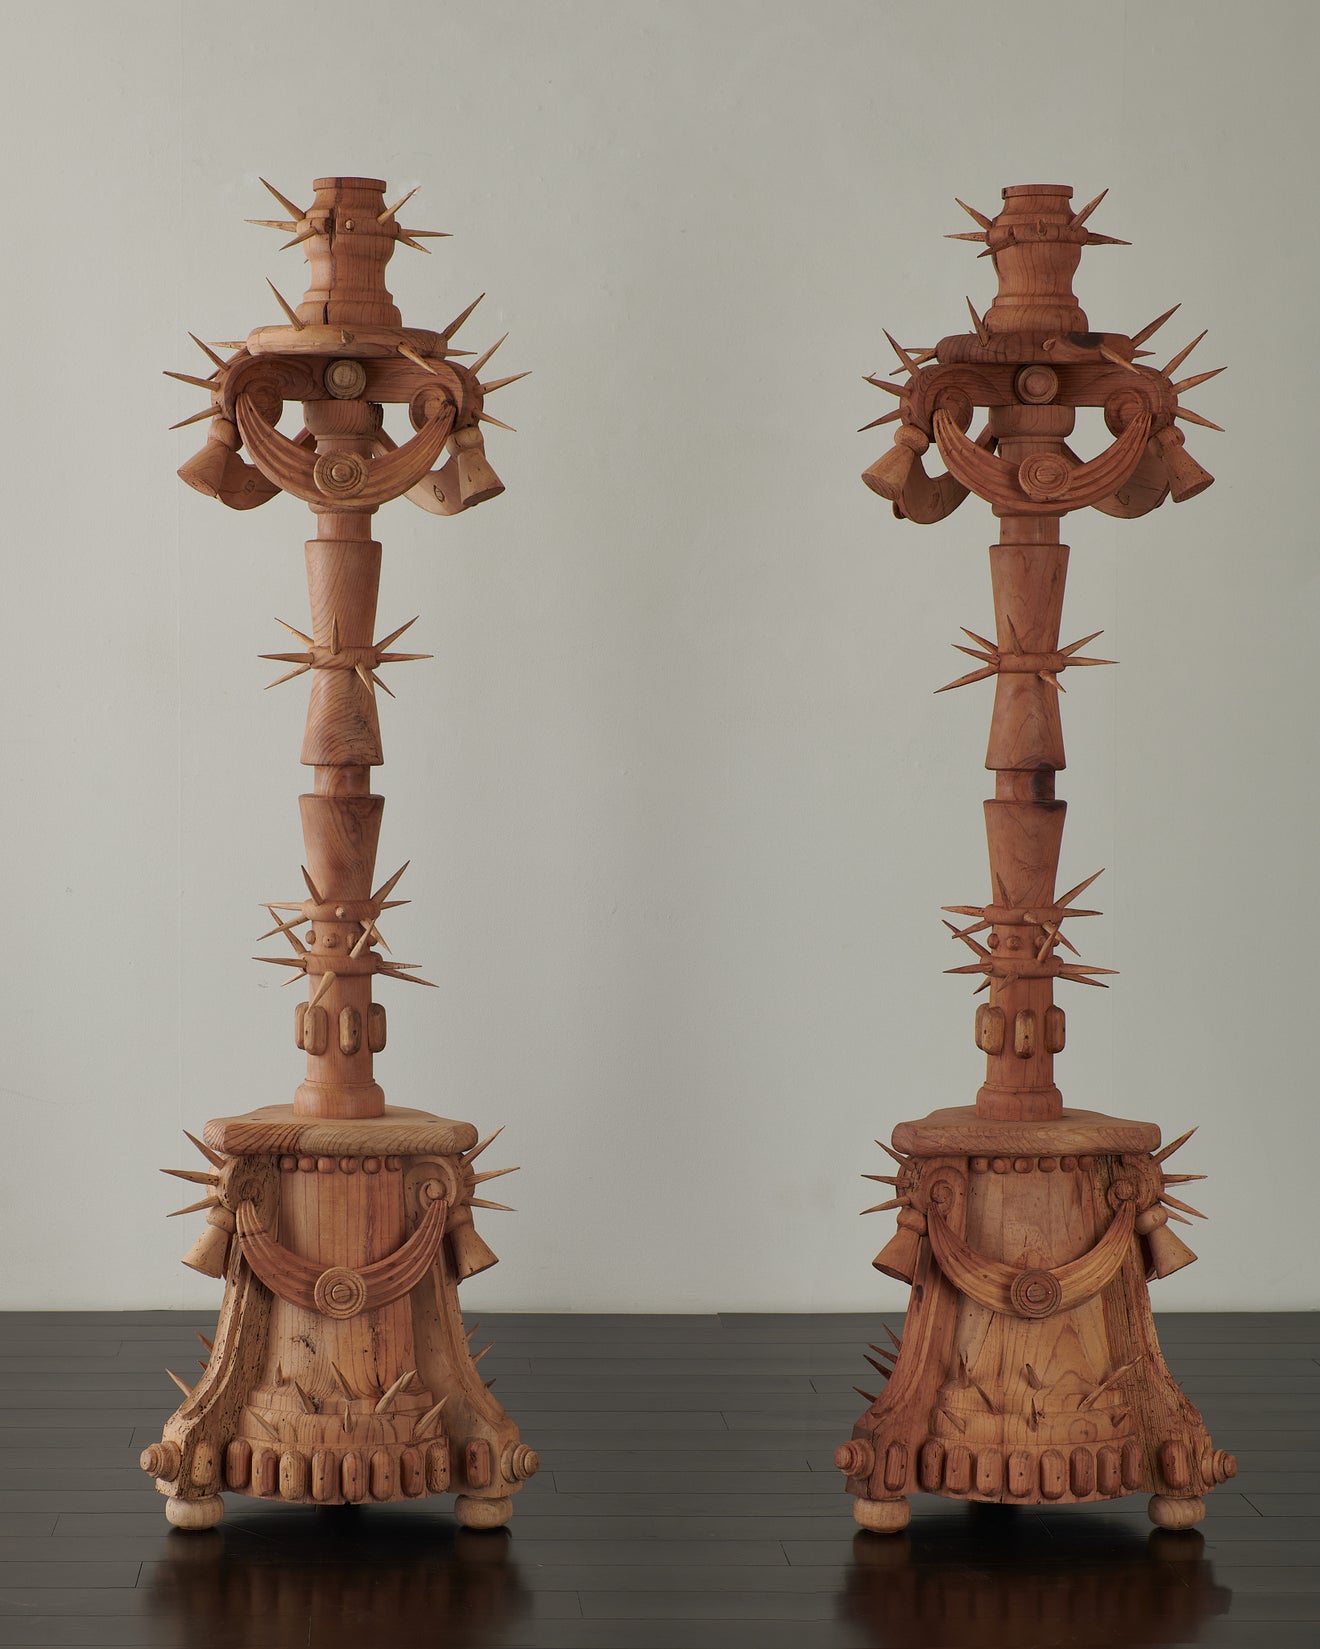 Pair of 'Patria' Handcrafted Candlesticks by Mike Diaz